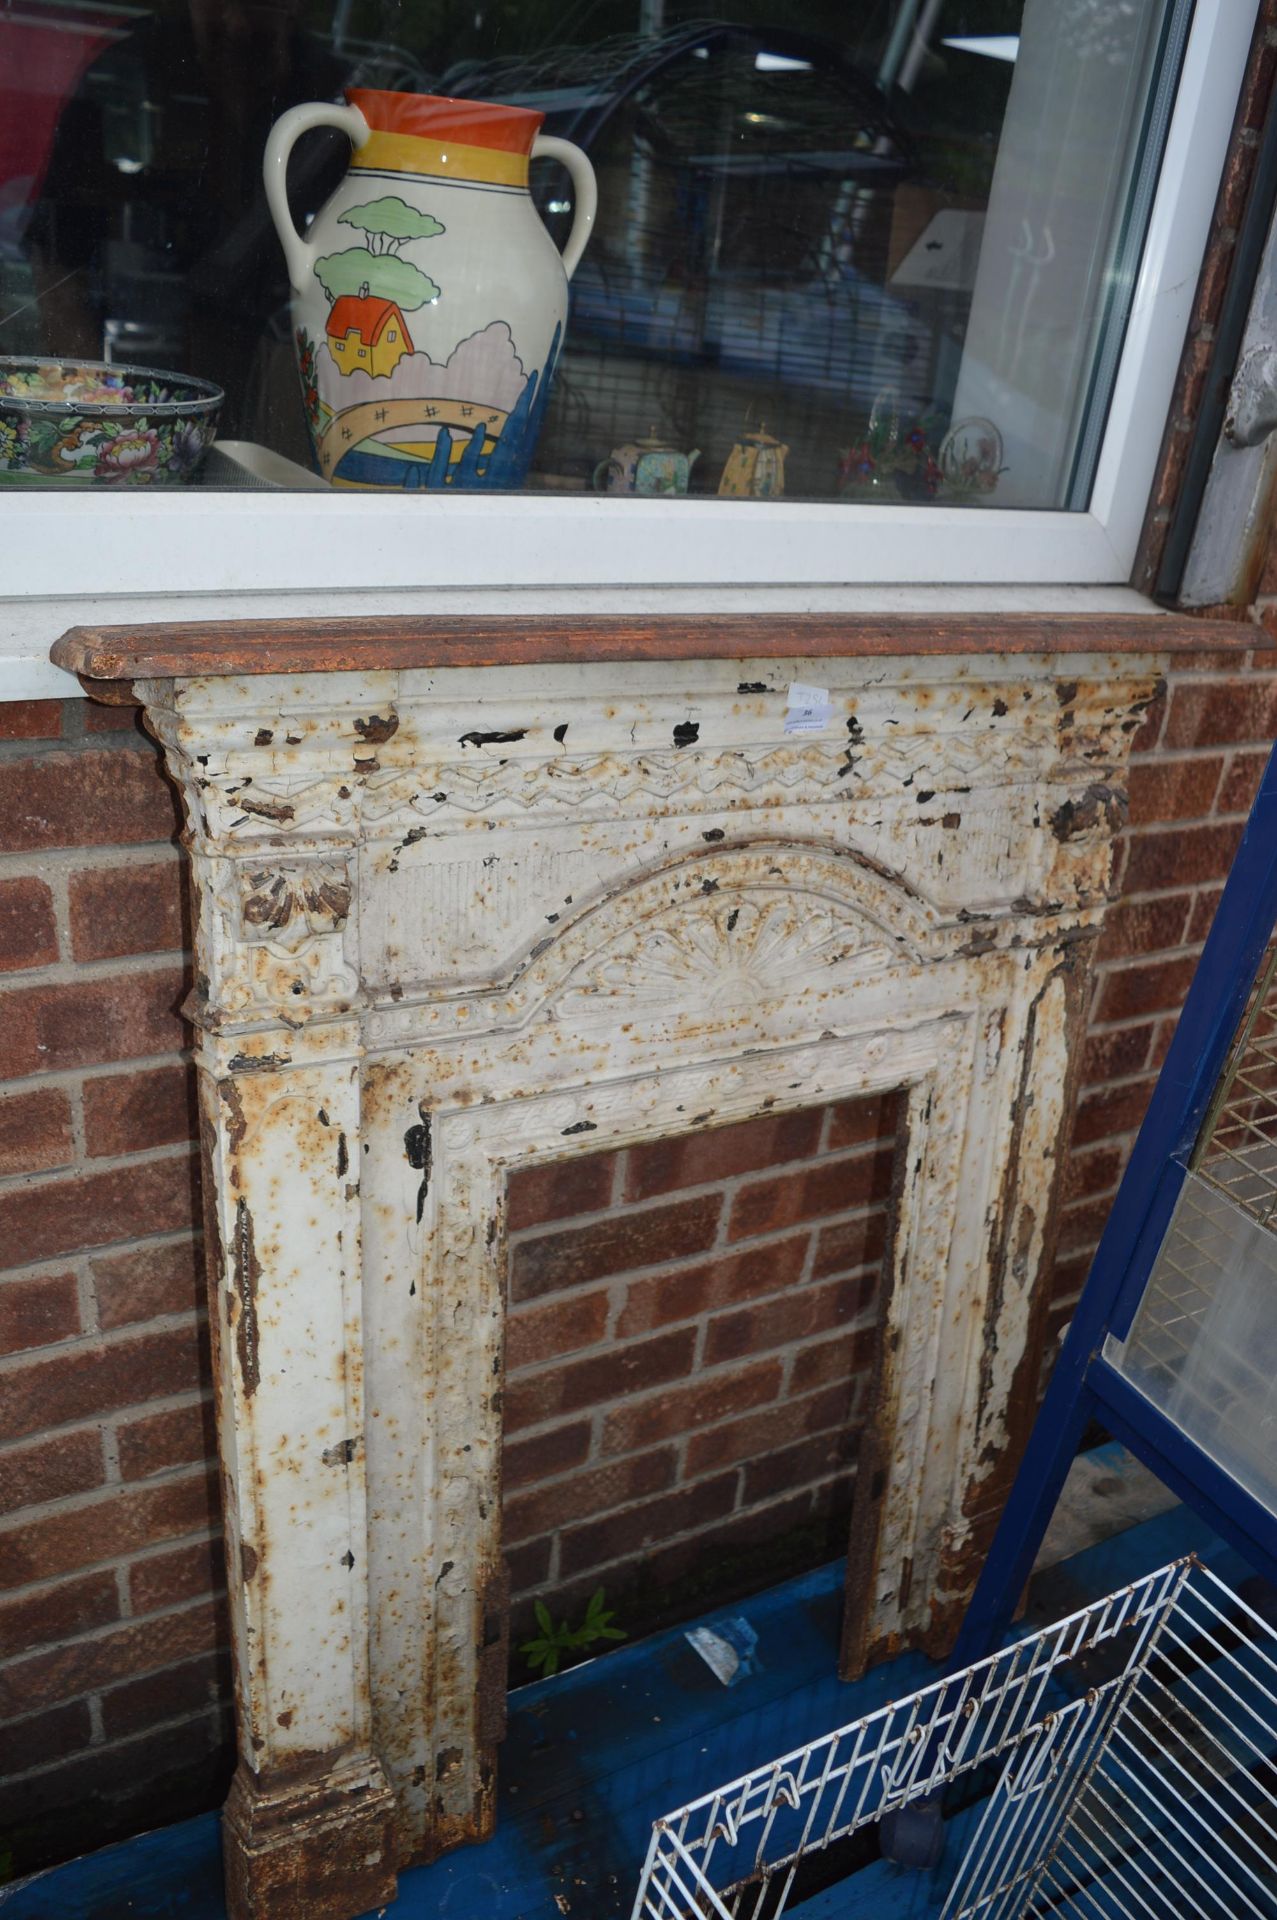 Painted Cast Iron Victorian Fireplace